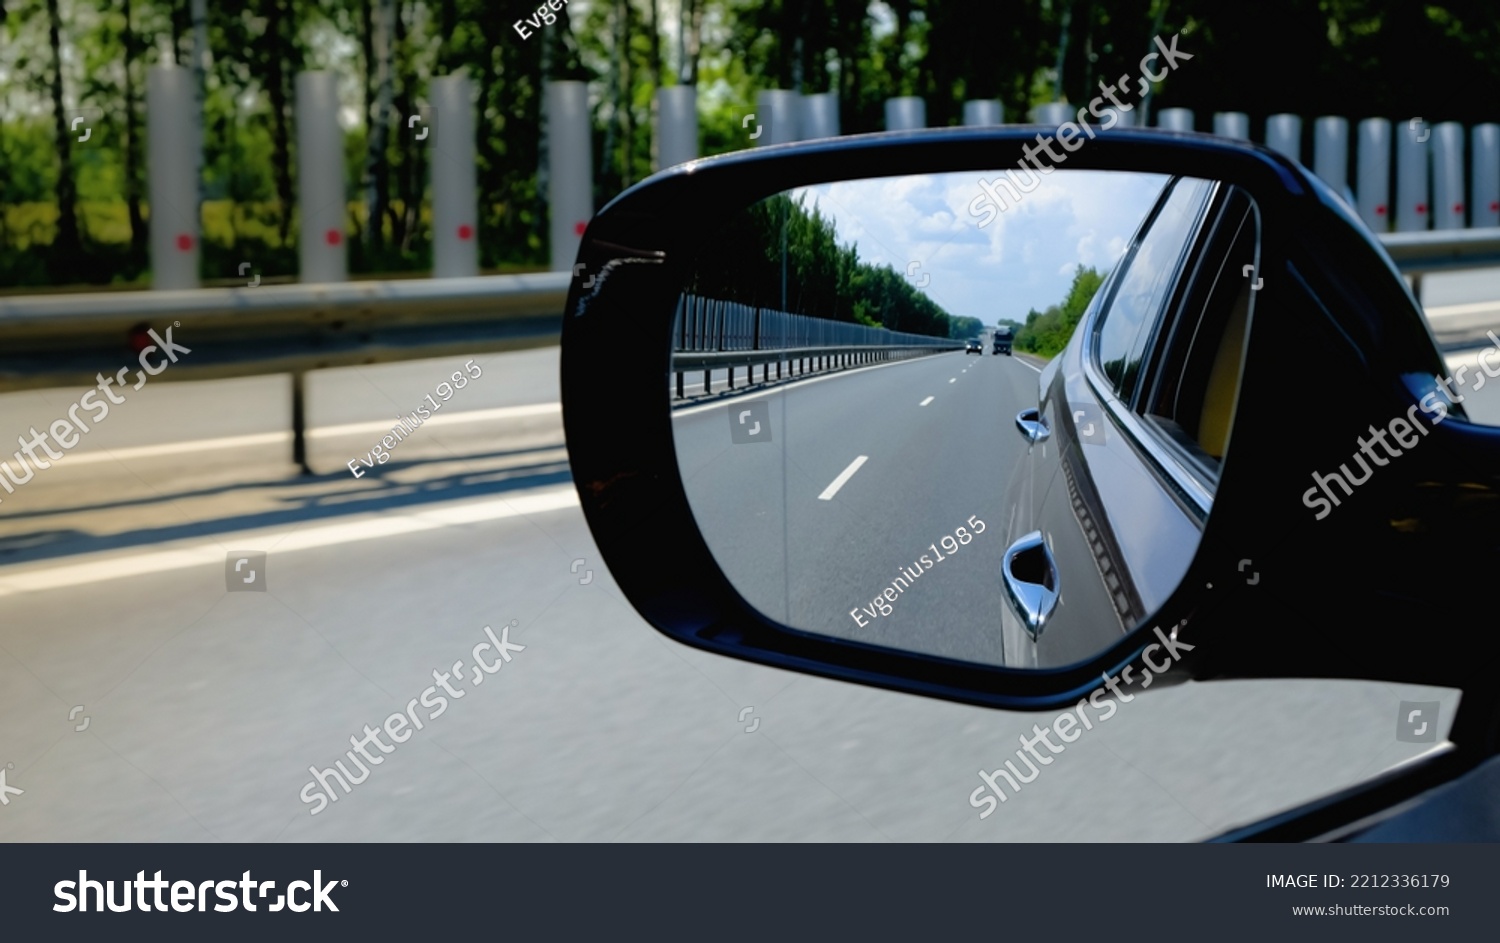 look in the rear view mirror of a car #2212336179